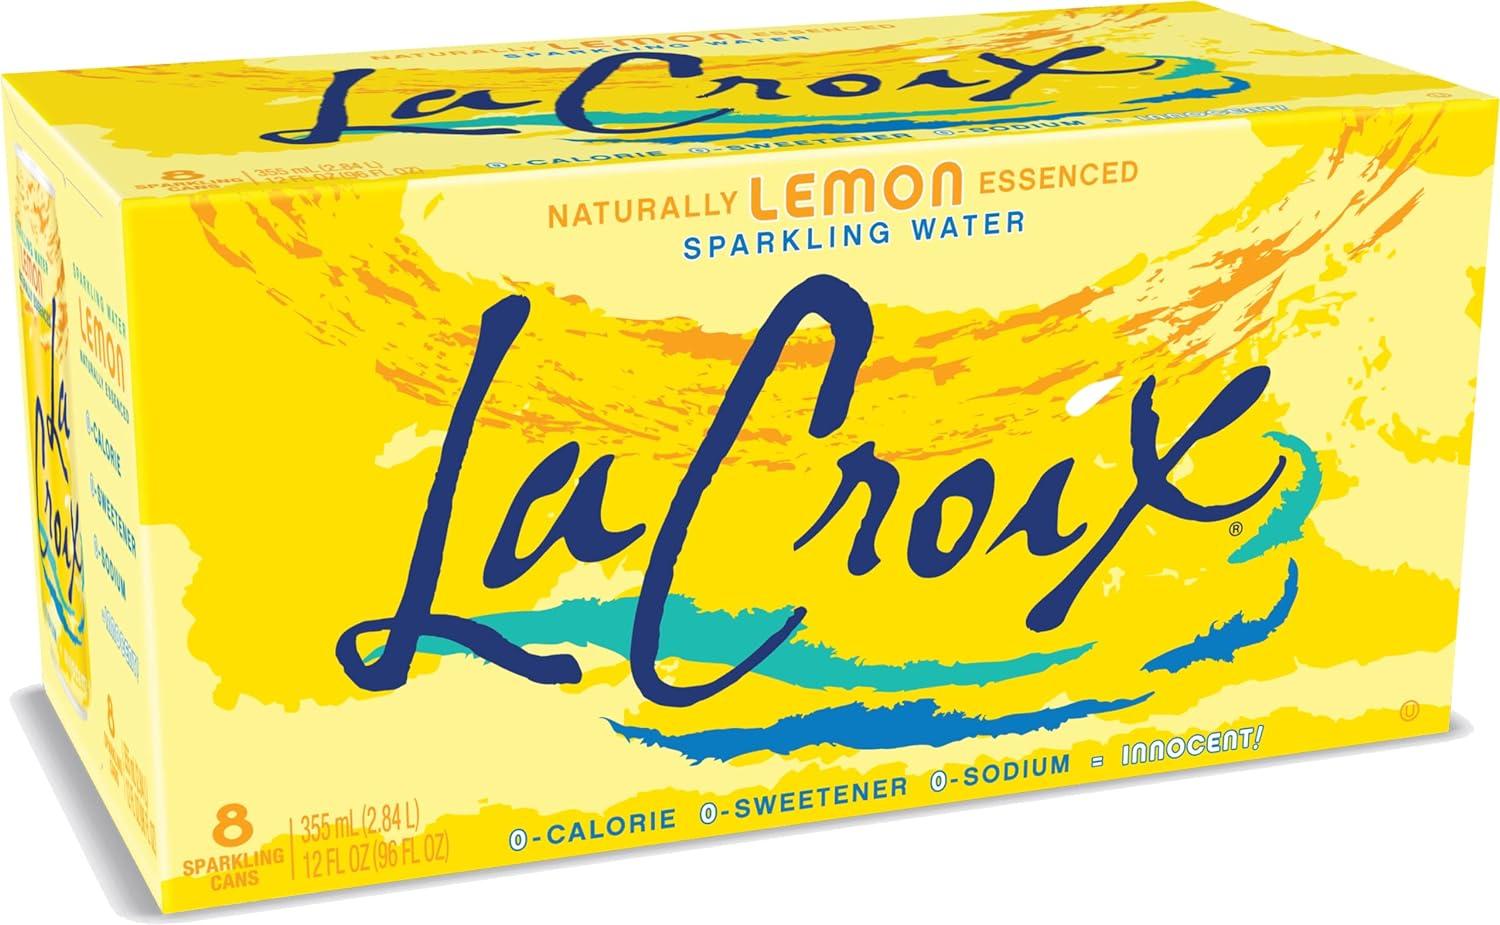 LaCroix Sparkling Water Lemon 8 Pack for $2.50 Shipped